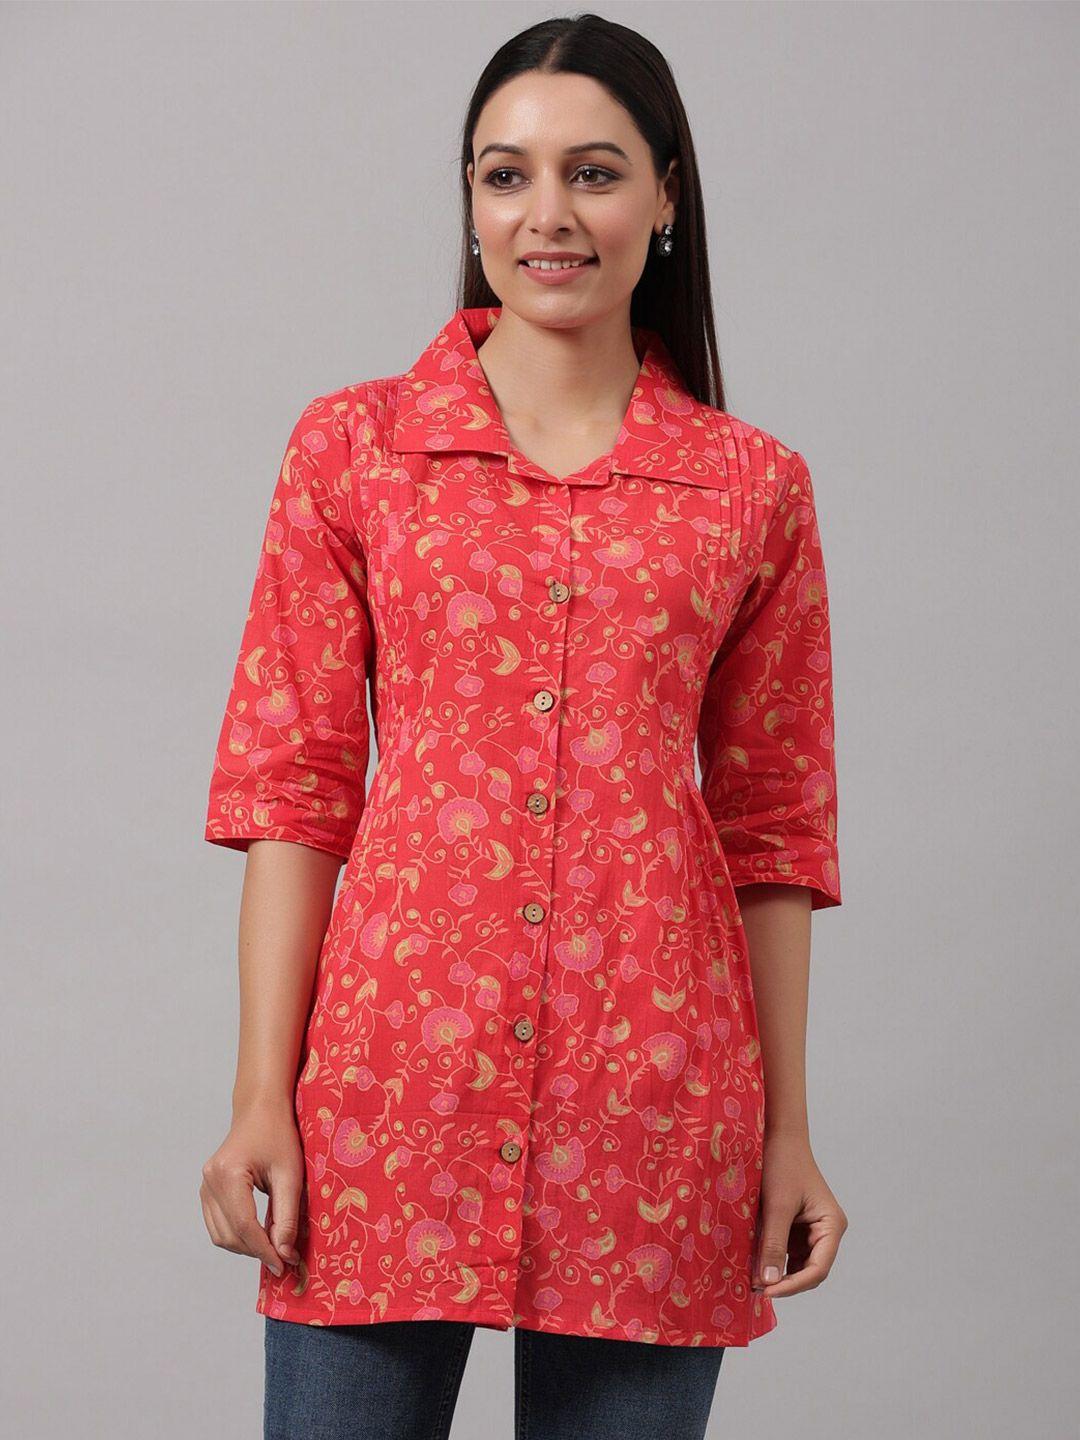 do-dhaage-floral-print-shirt-style-longline-top